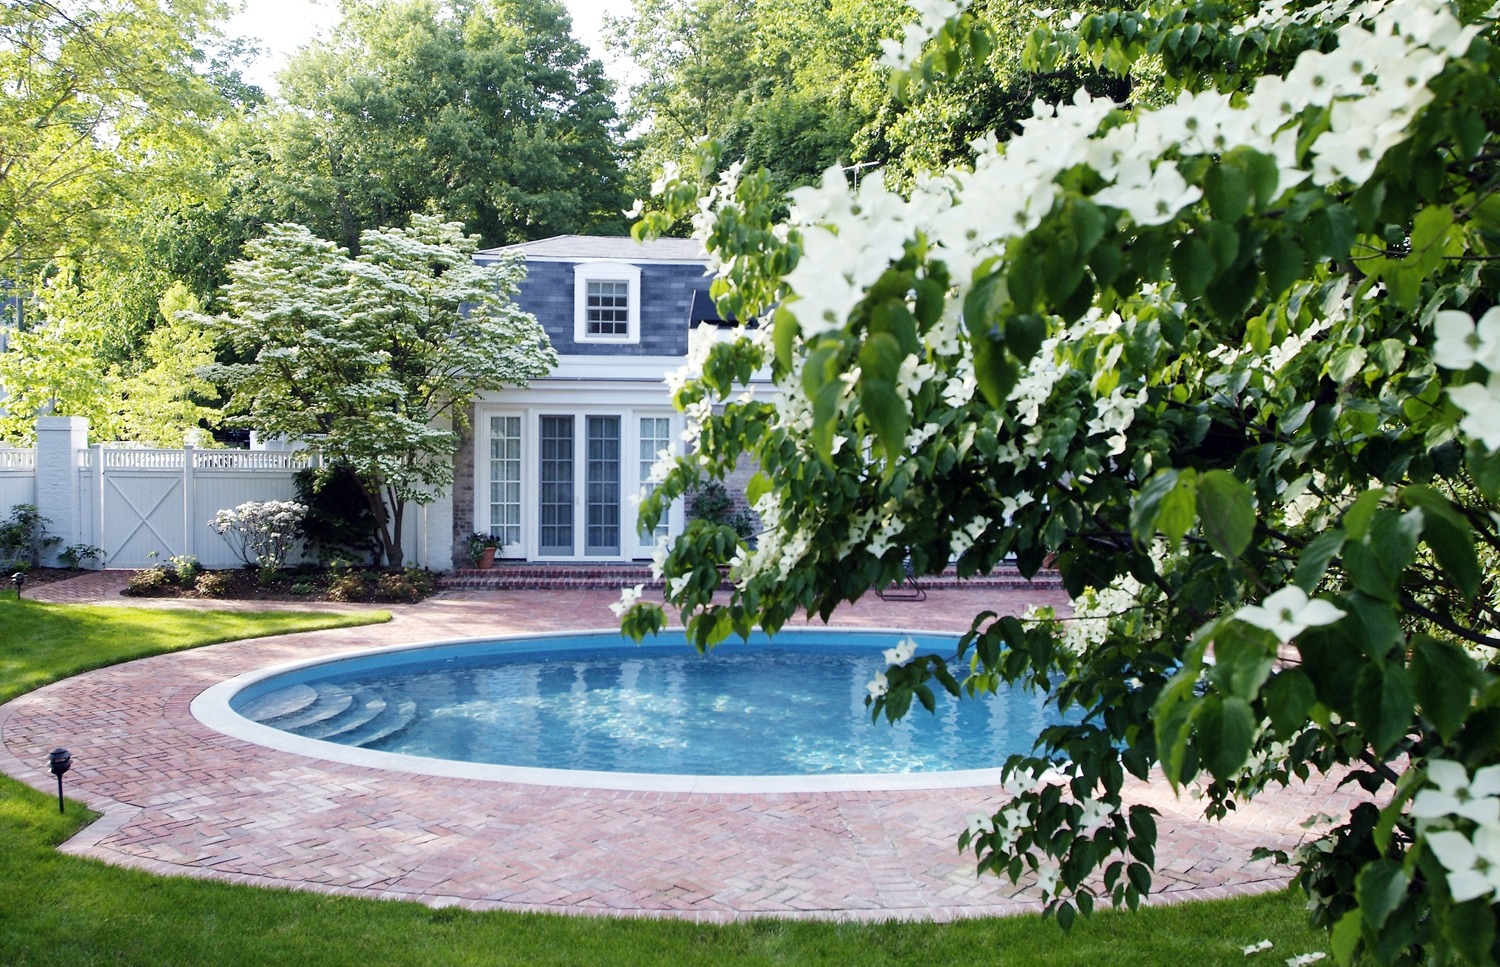 Picture of a serene backyard with a kidney-shaped swimming pool, brick patio, dogwood flowers in the foreground, and a classic house with shutters.